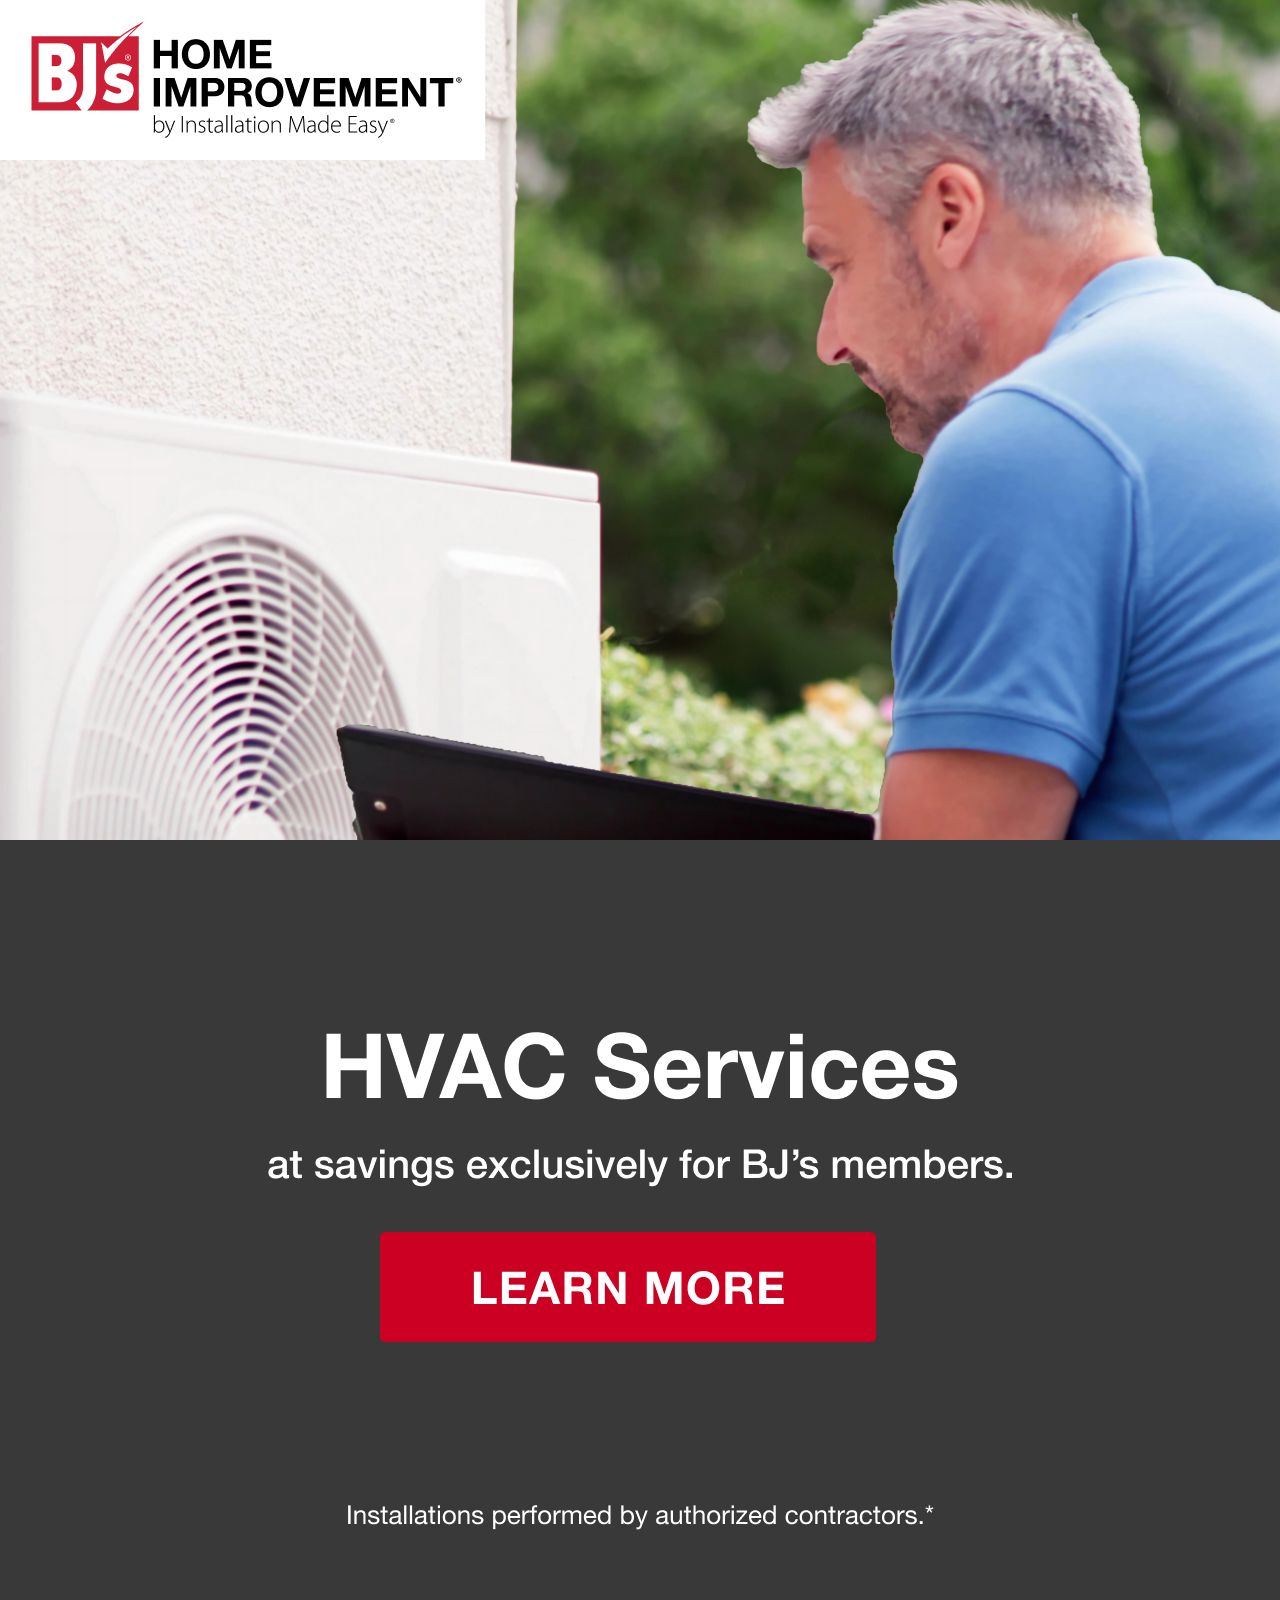 Home Improvement: HVAC. Click to learn more